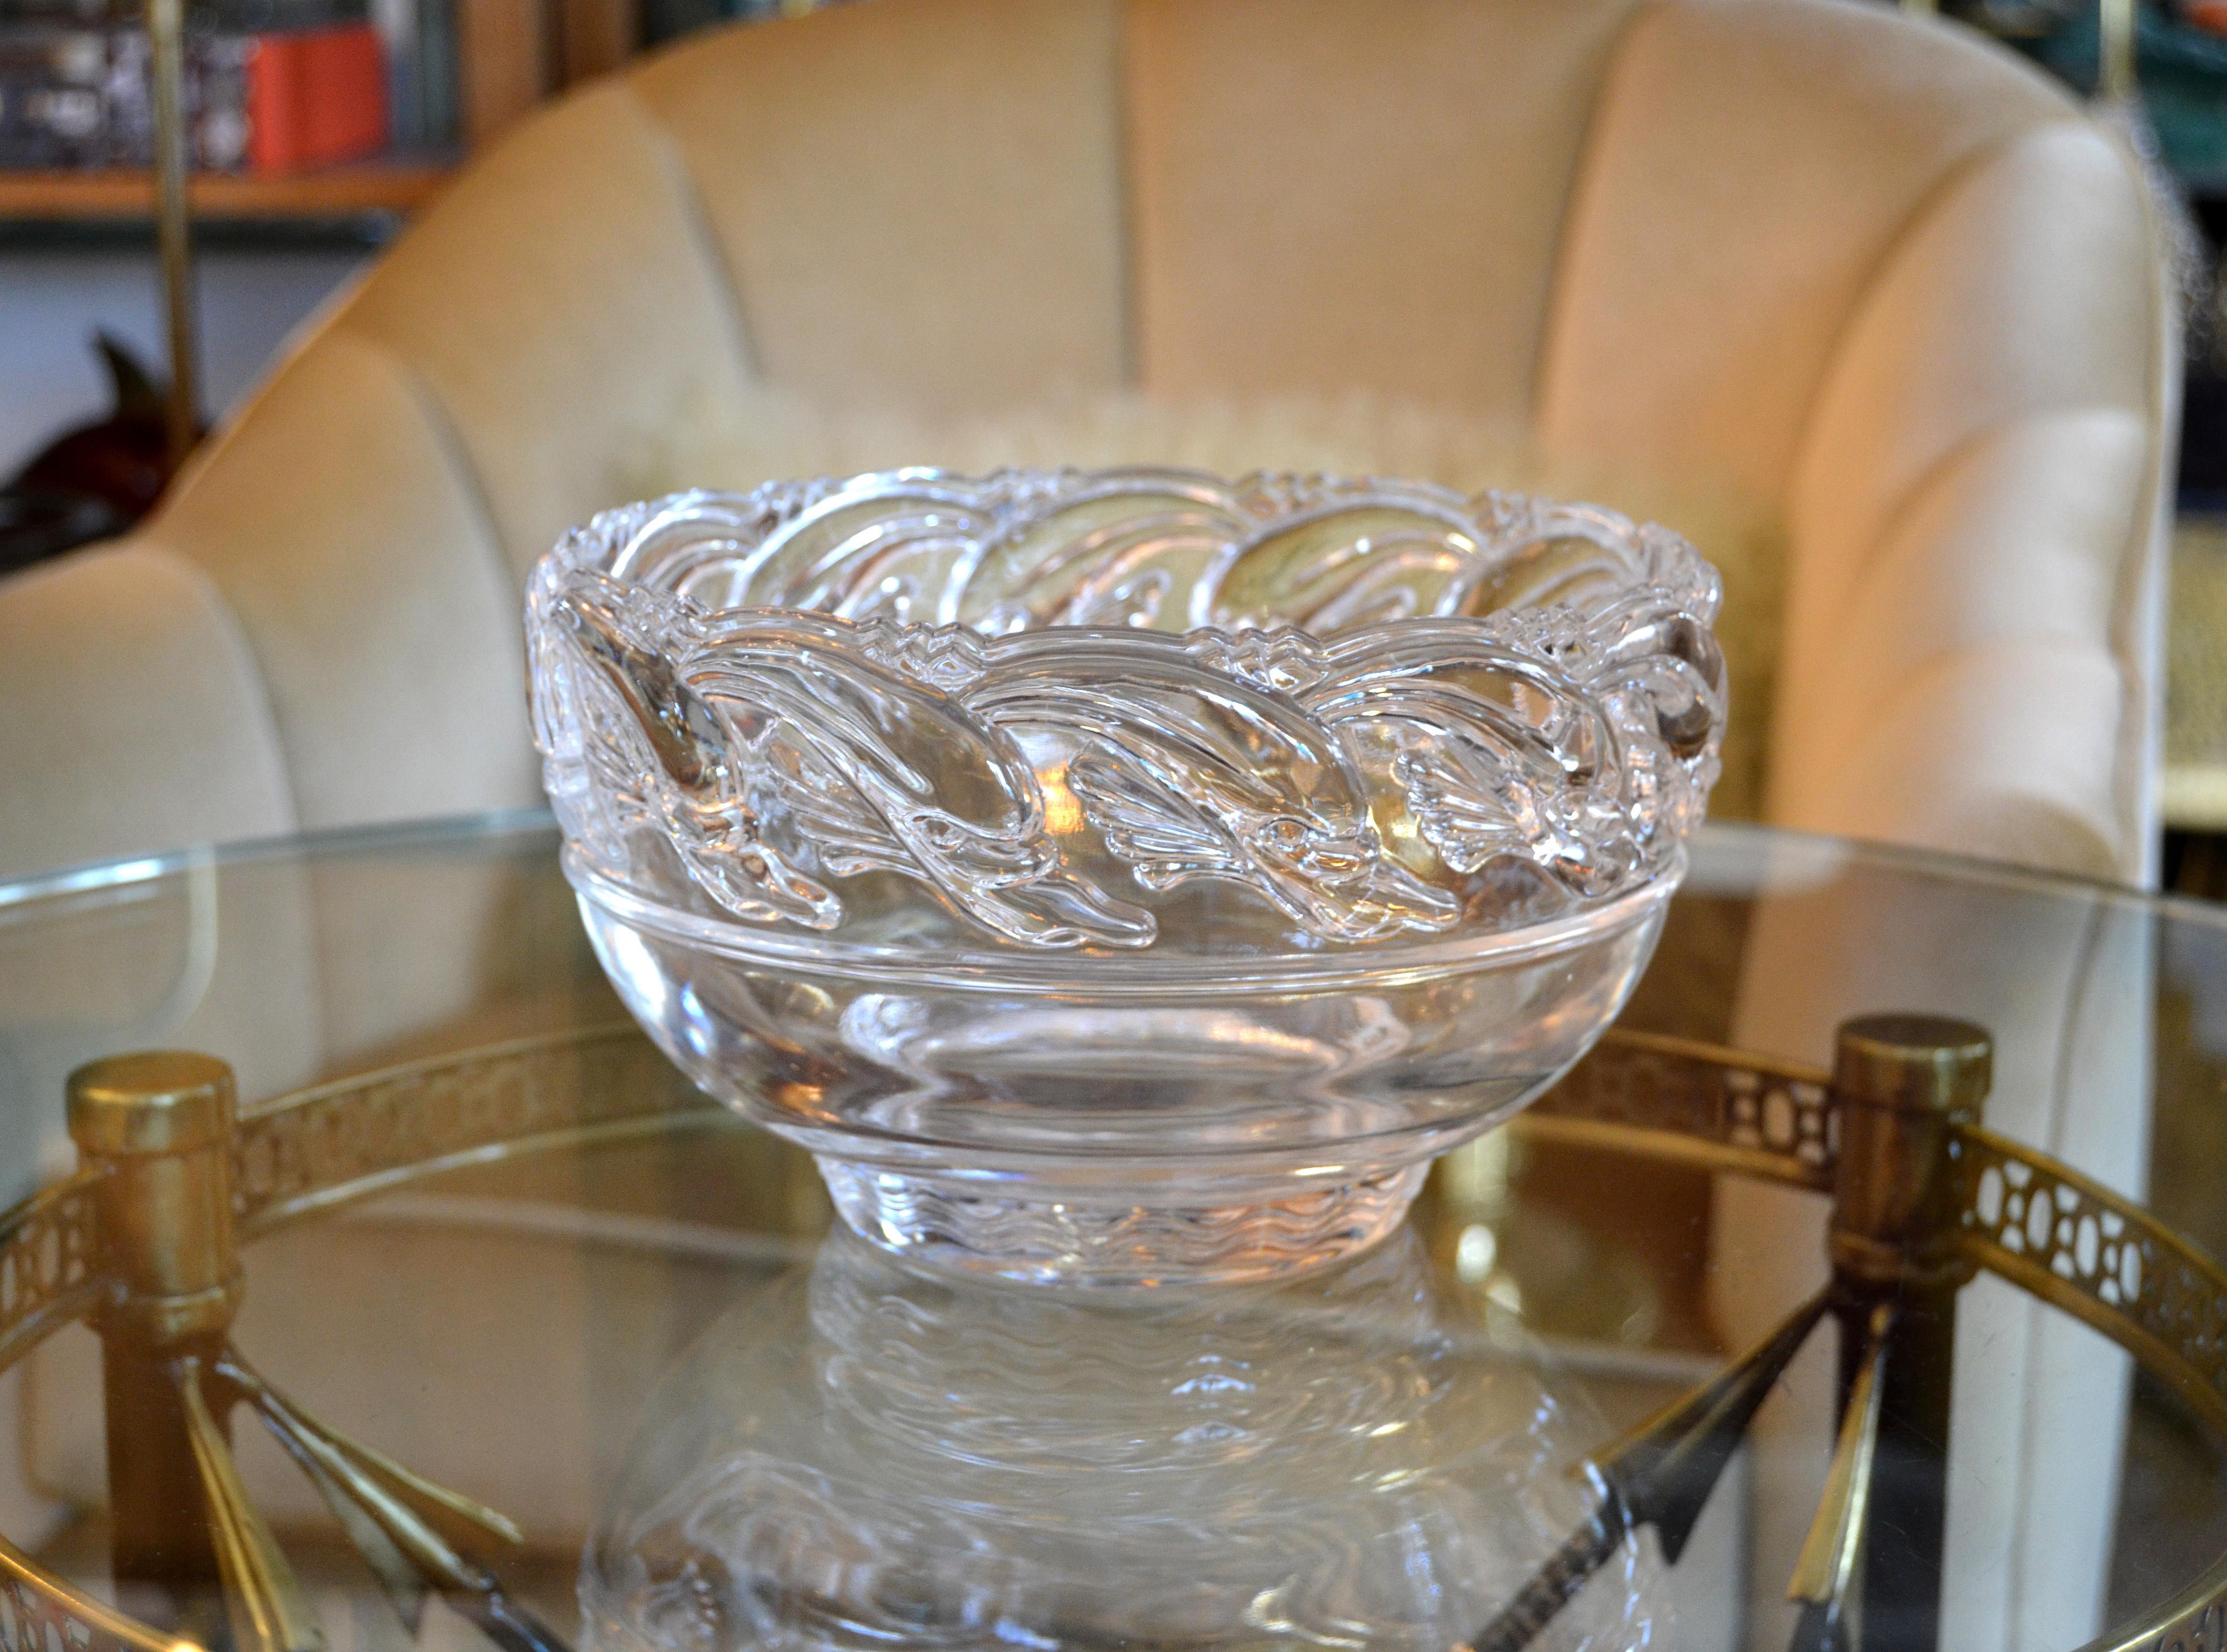 Mid-Century Modern clear Tiffany & Company art glass crystal footed bowl with Dolphins.
Marked underneath, Tiffany & Co. 
Simply Lovely and made with great craftsmanship.